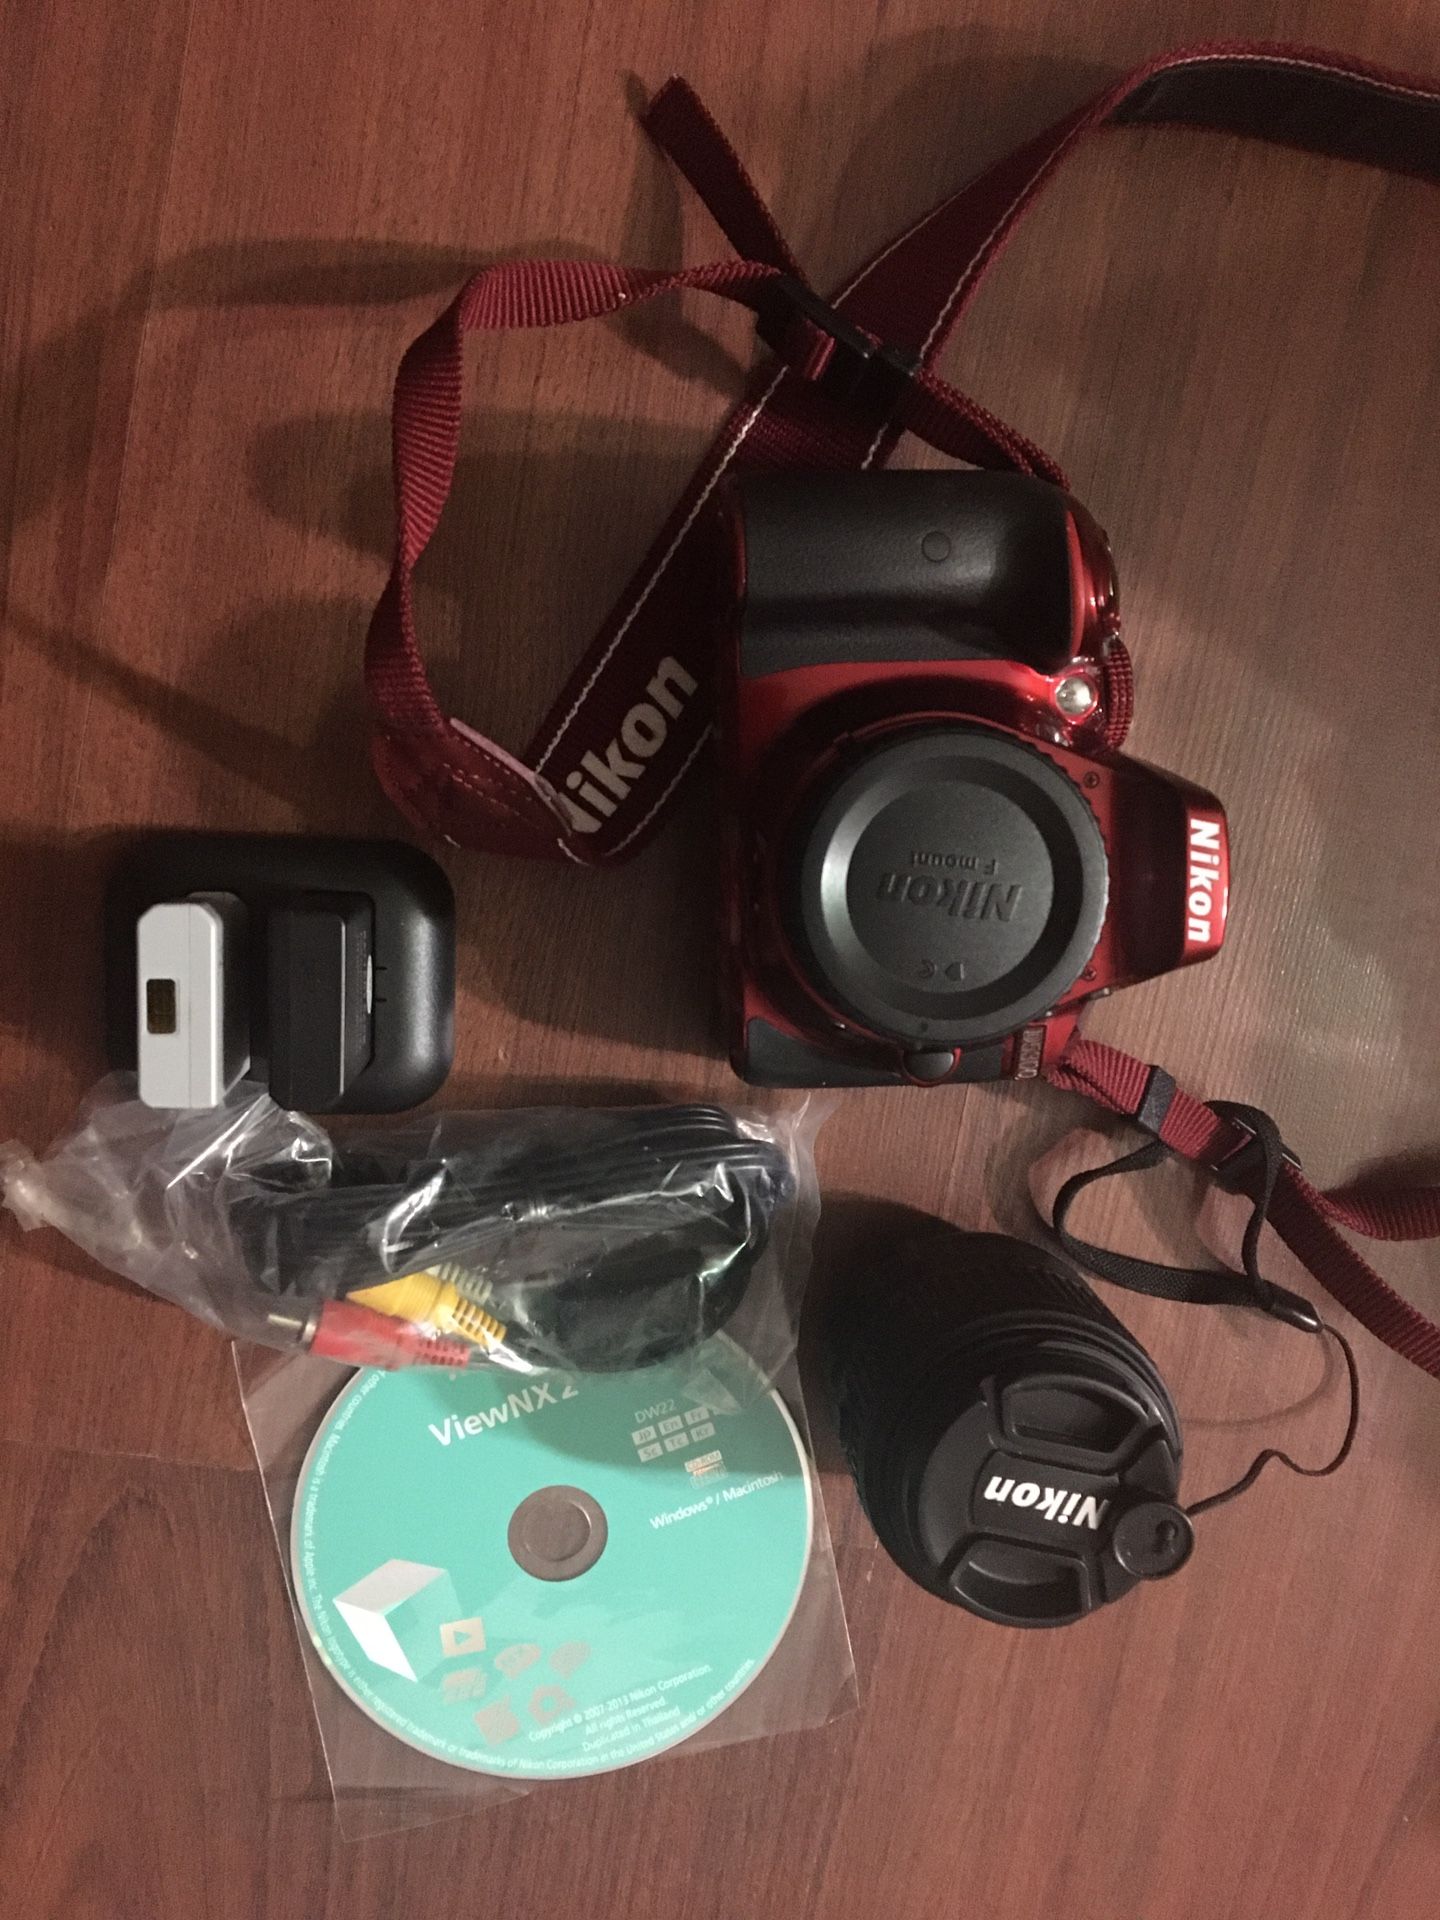 Nikon d5300 red edition with accessories..